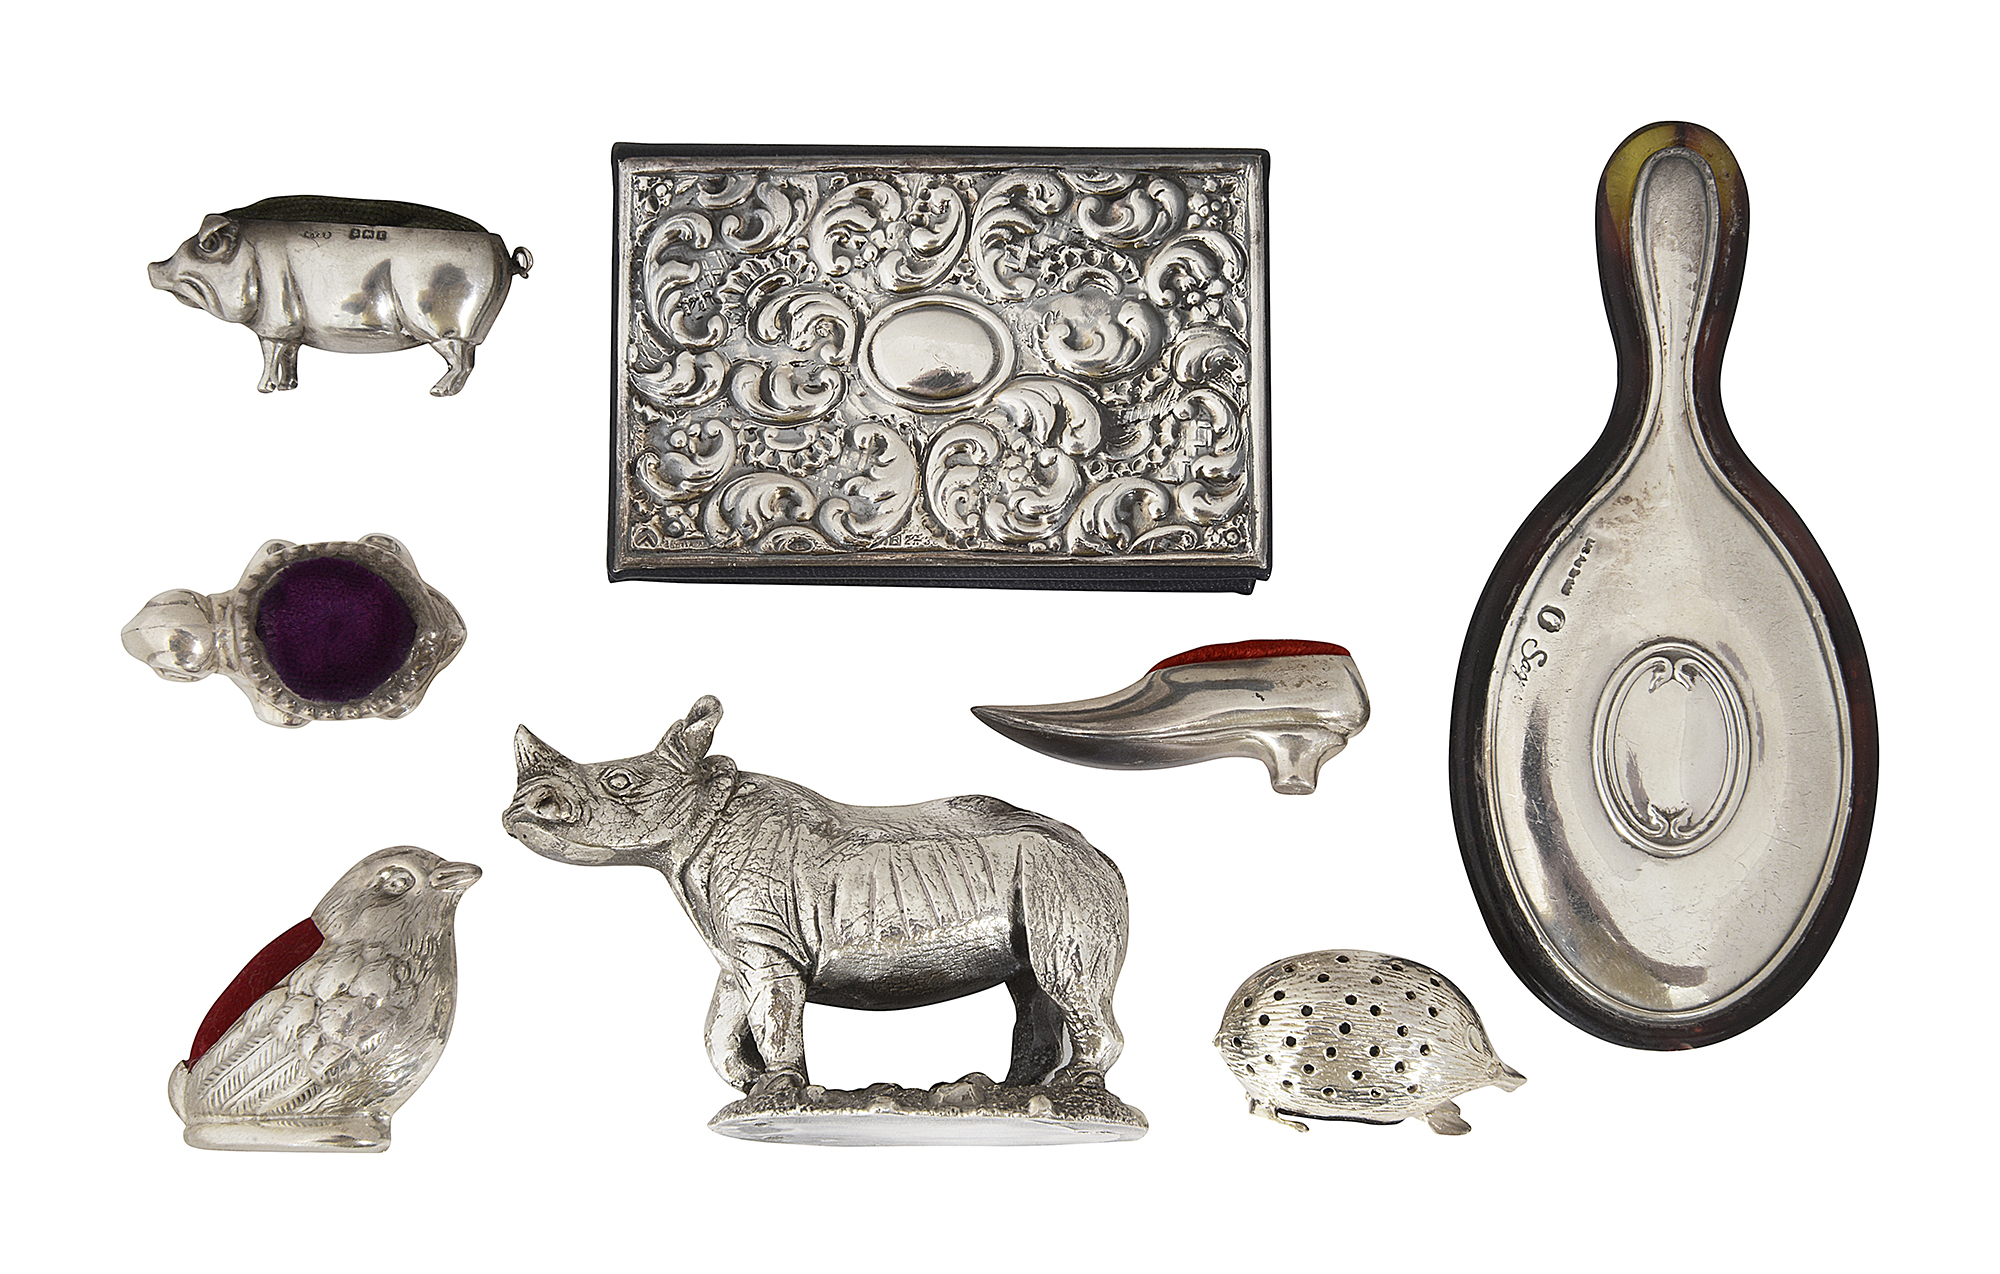 A collection of novelty silver pincushions and other items